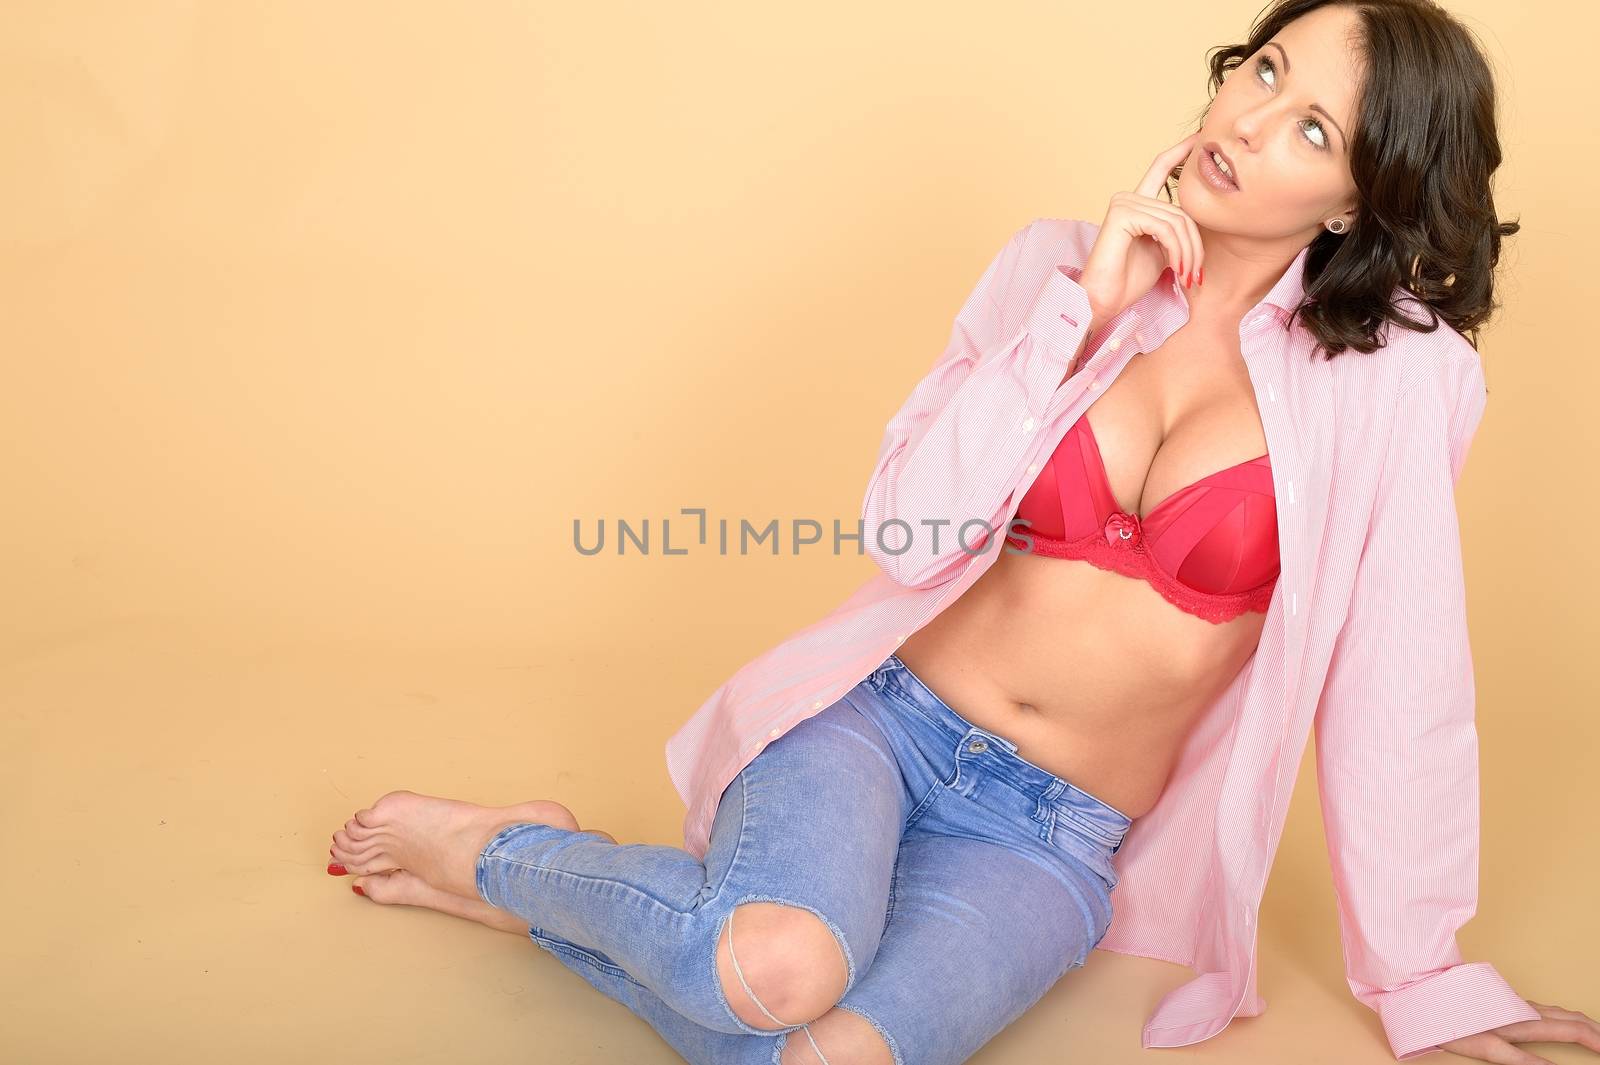 Attractive Young Woman Wearing Jeans and Shirt by Whiteboxmedia